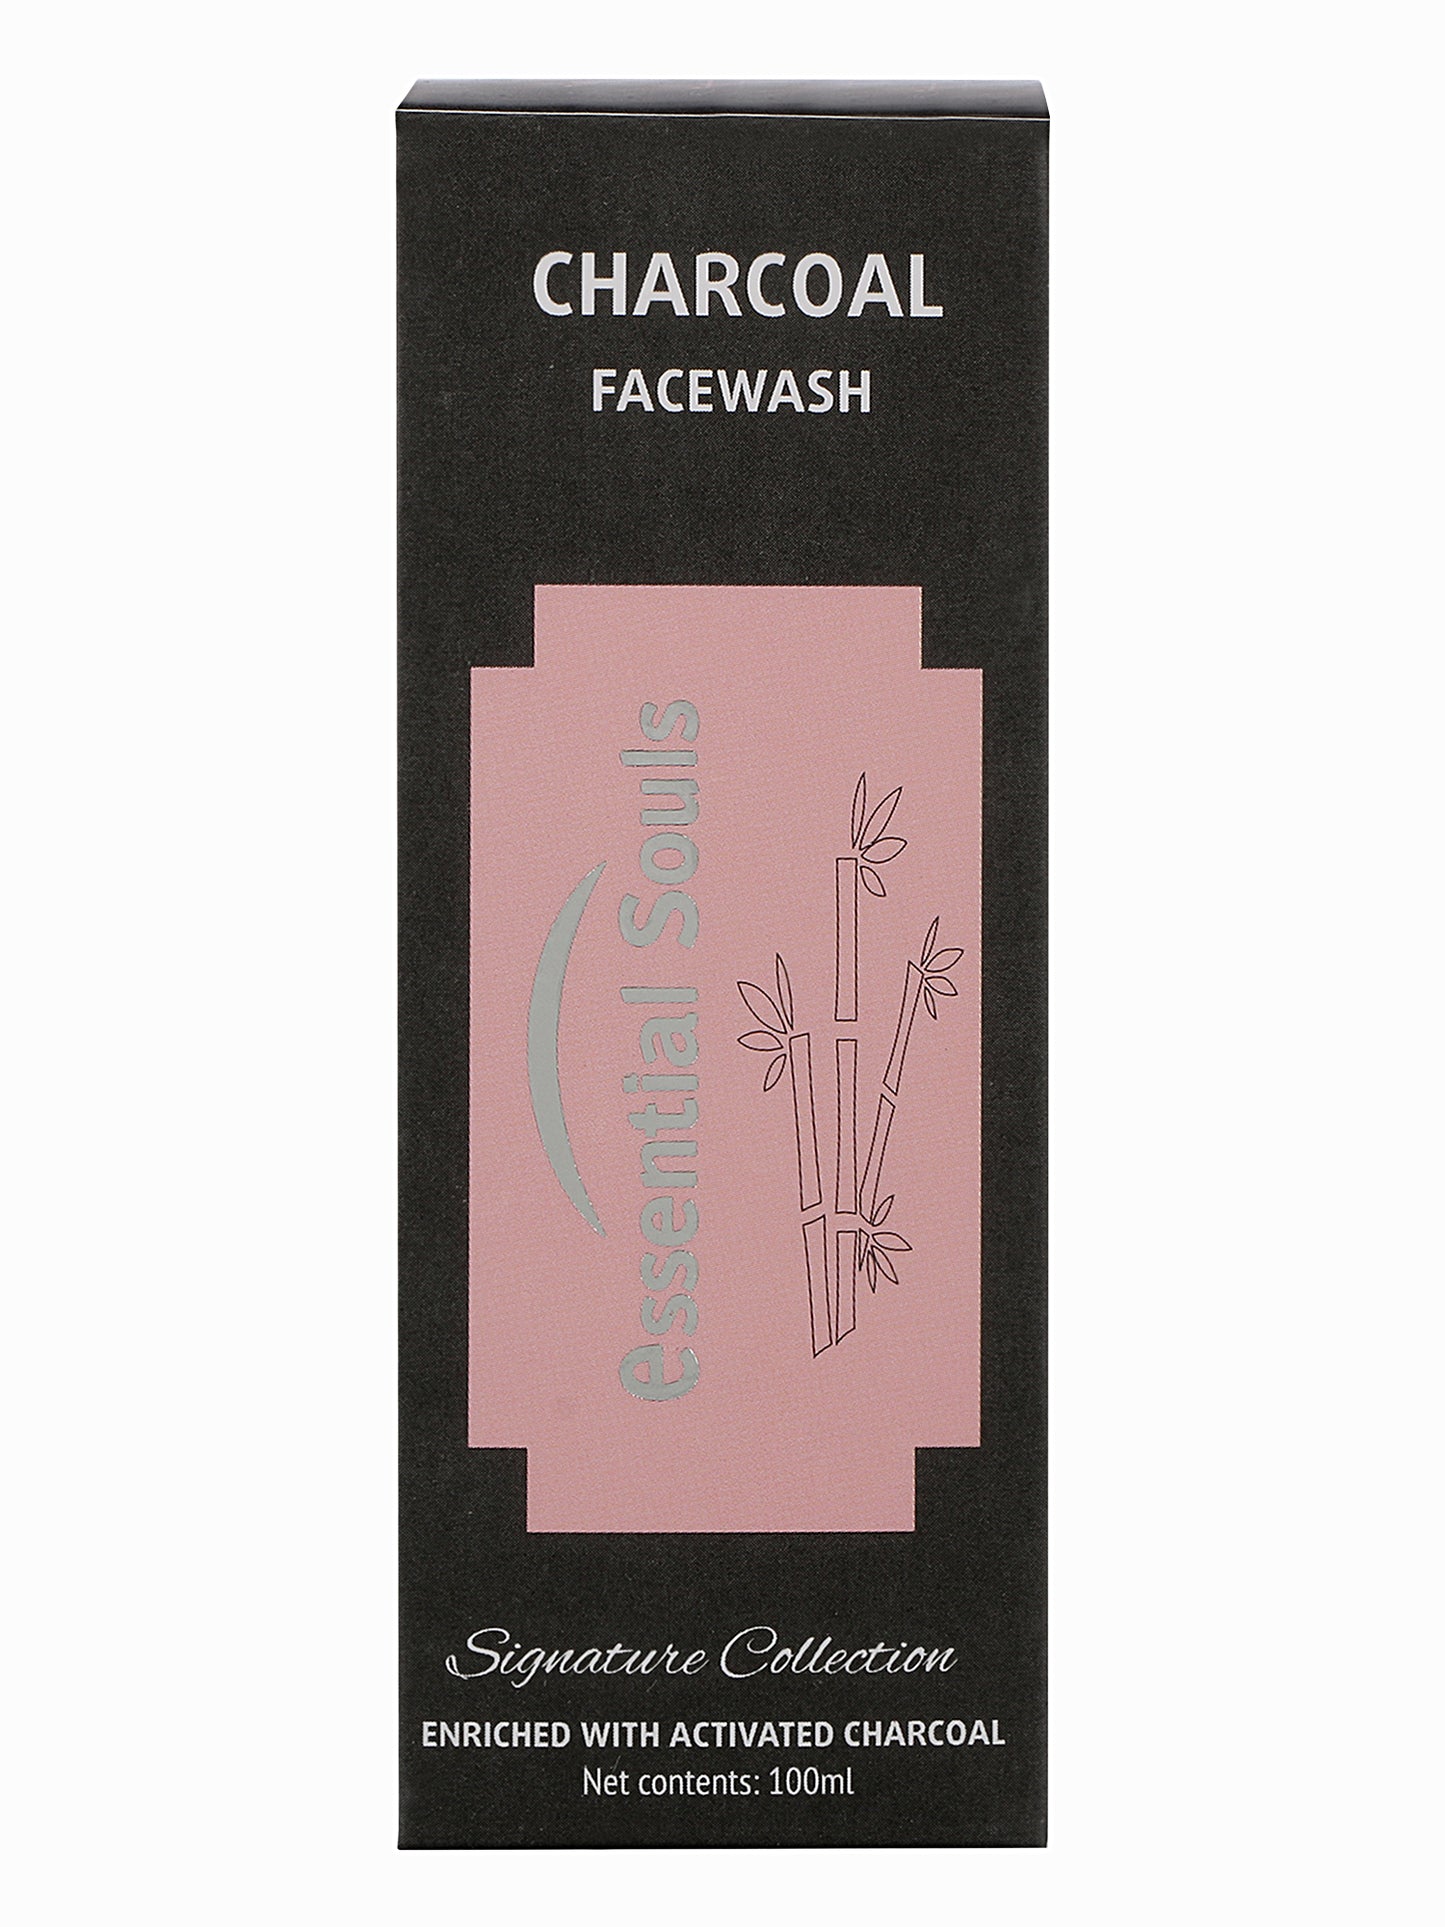 Essential Souls Charcoal Face Wash - 100ml